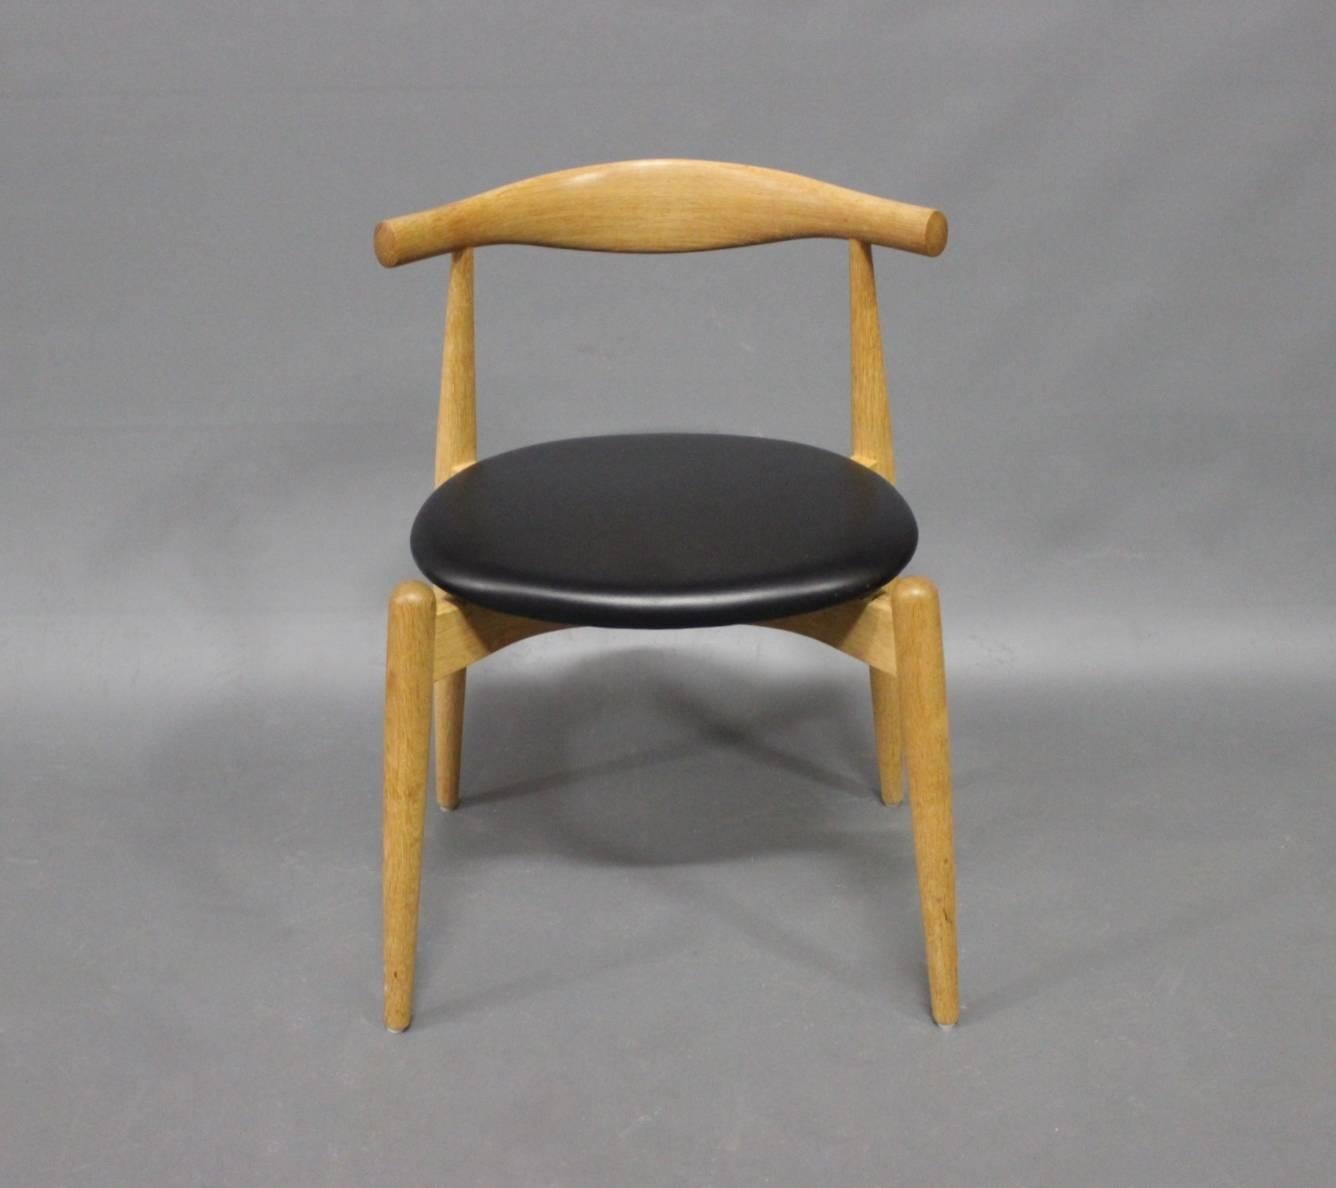 A set of six, Elbow chairs, CH20, designed by Hans J. Wegner in 1956 and manufactured by Carl Hansen & Son in 2008. The chairs are of oak and with seats of black leather.